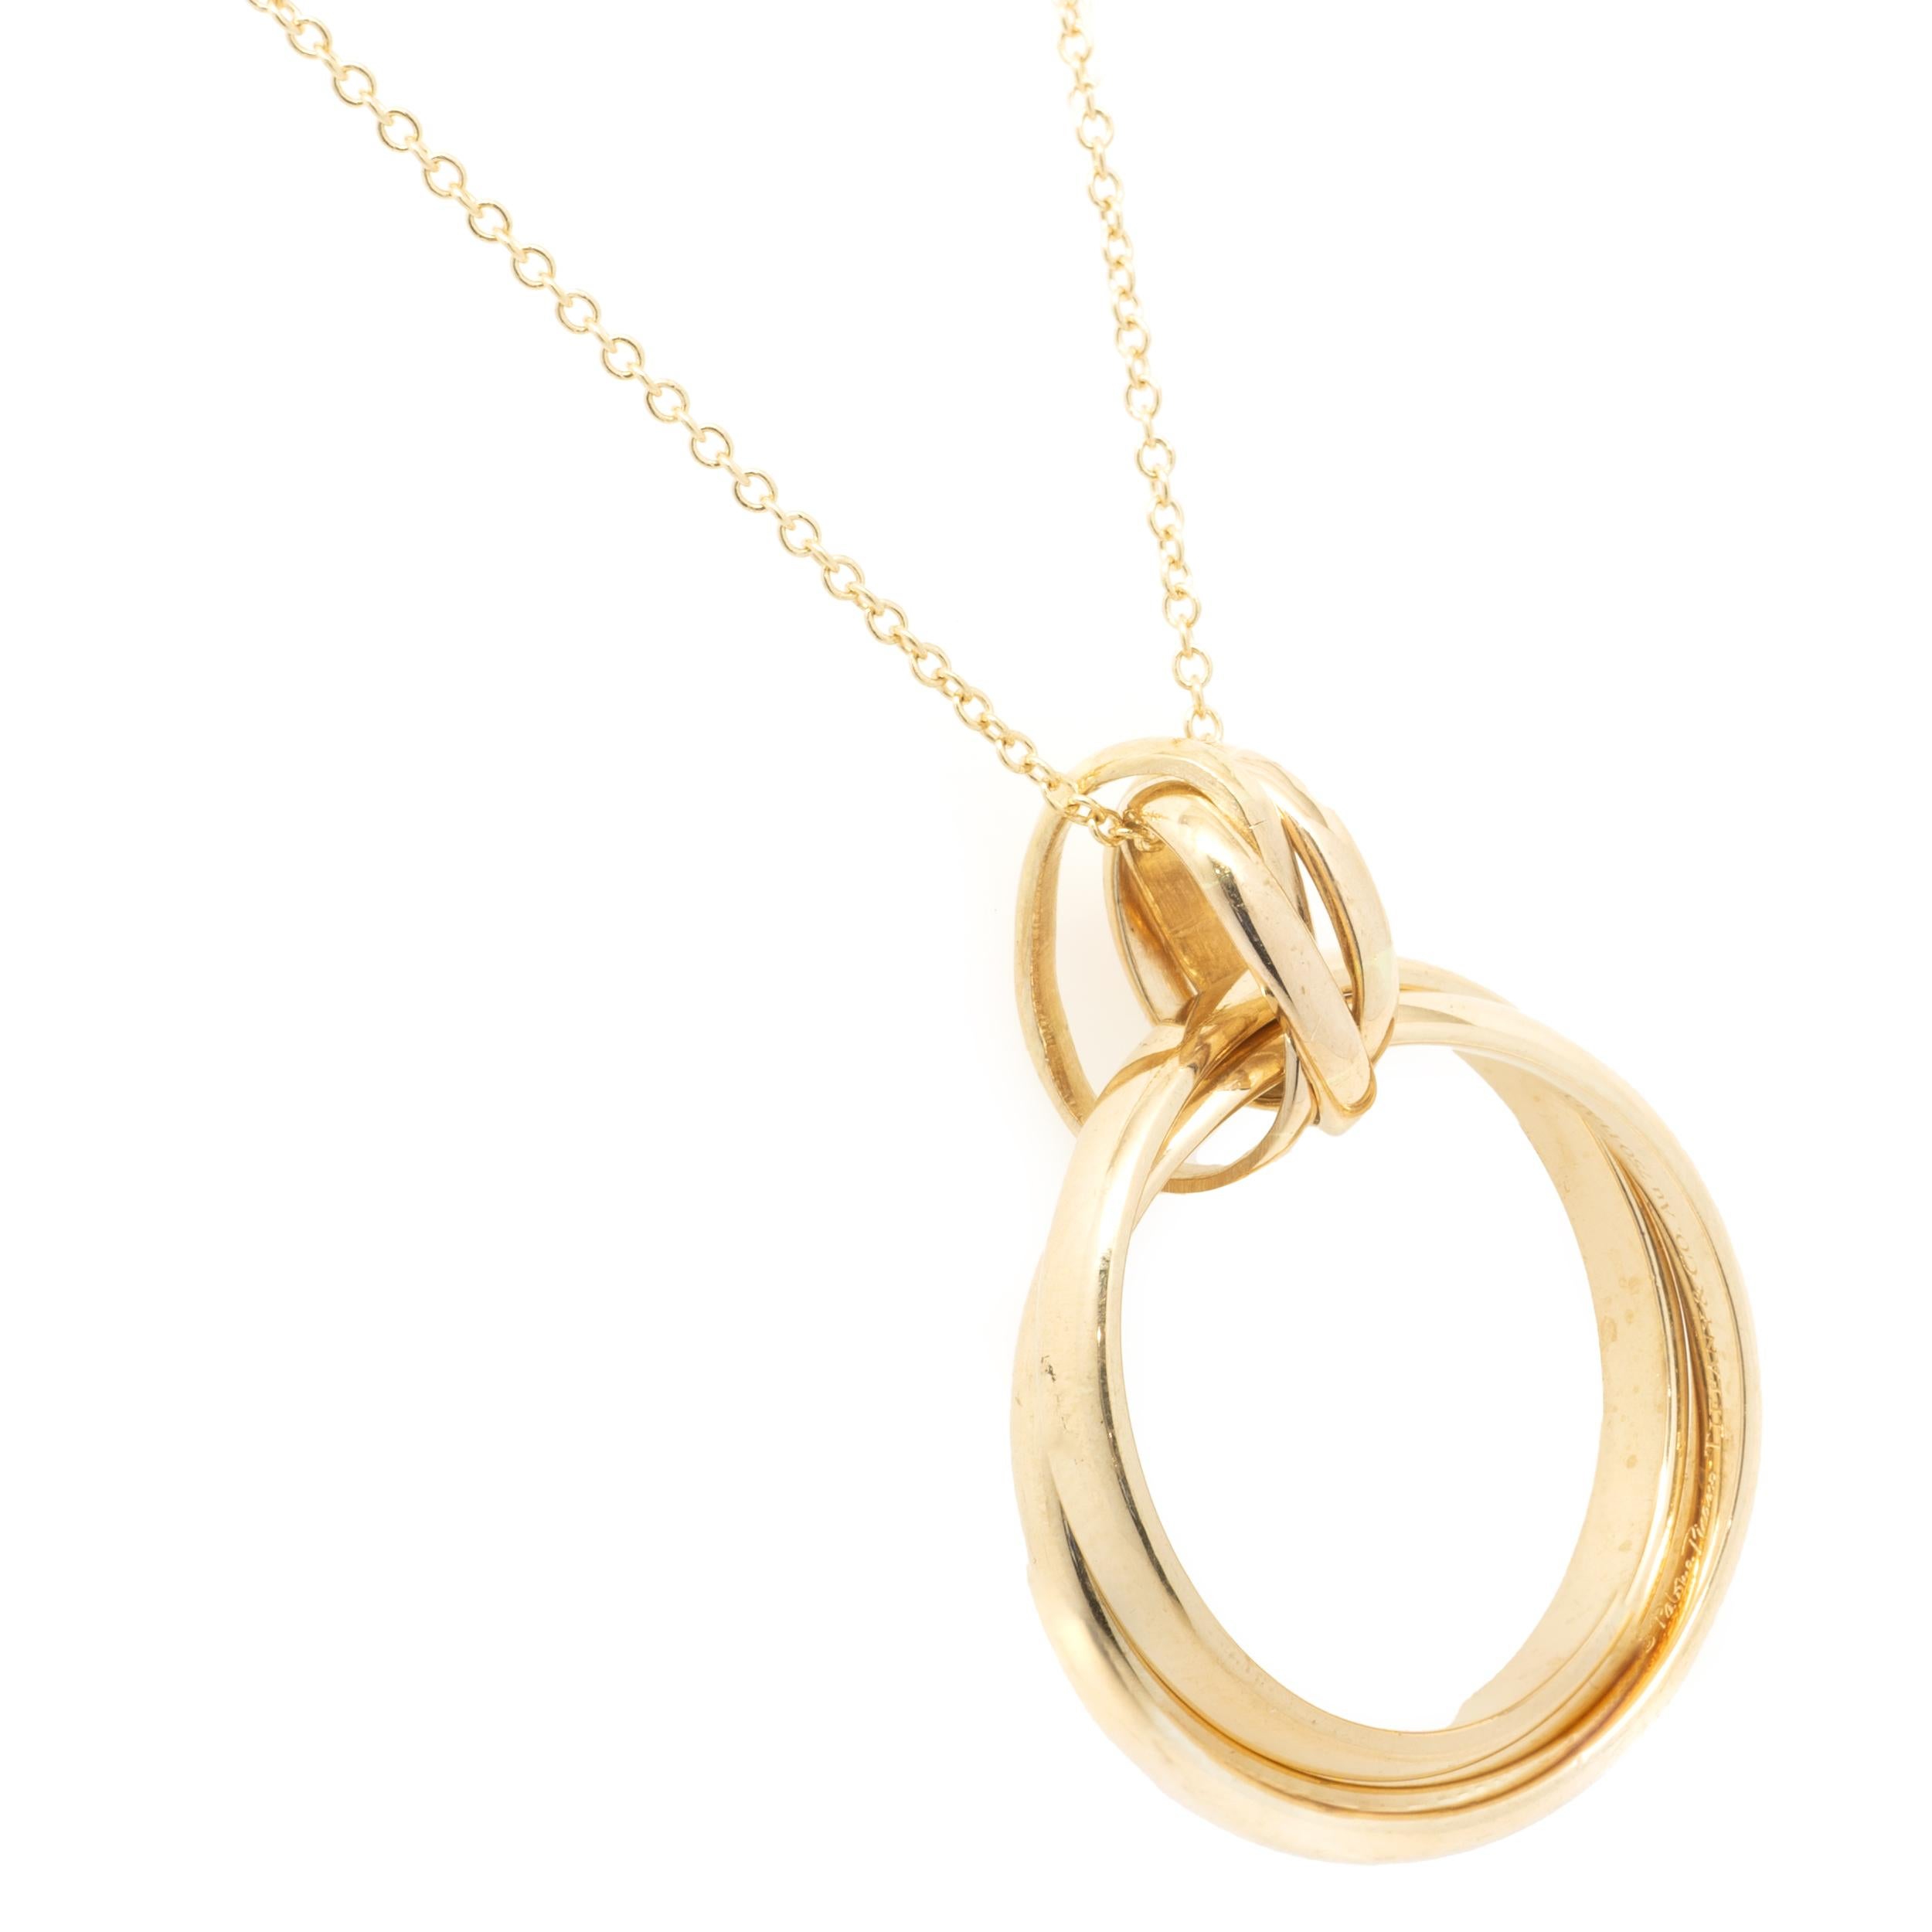 Designer: Tiffany & Co. 
Material: 18K yellow gold
Dimensions: necklace measures 18-20-inches in length
Weight: 9.51 grams
